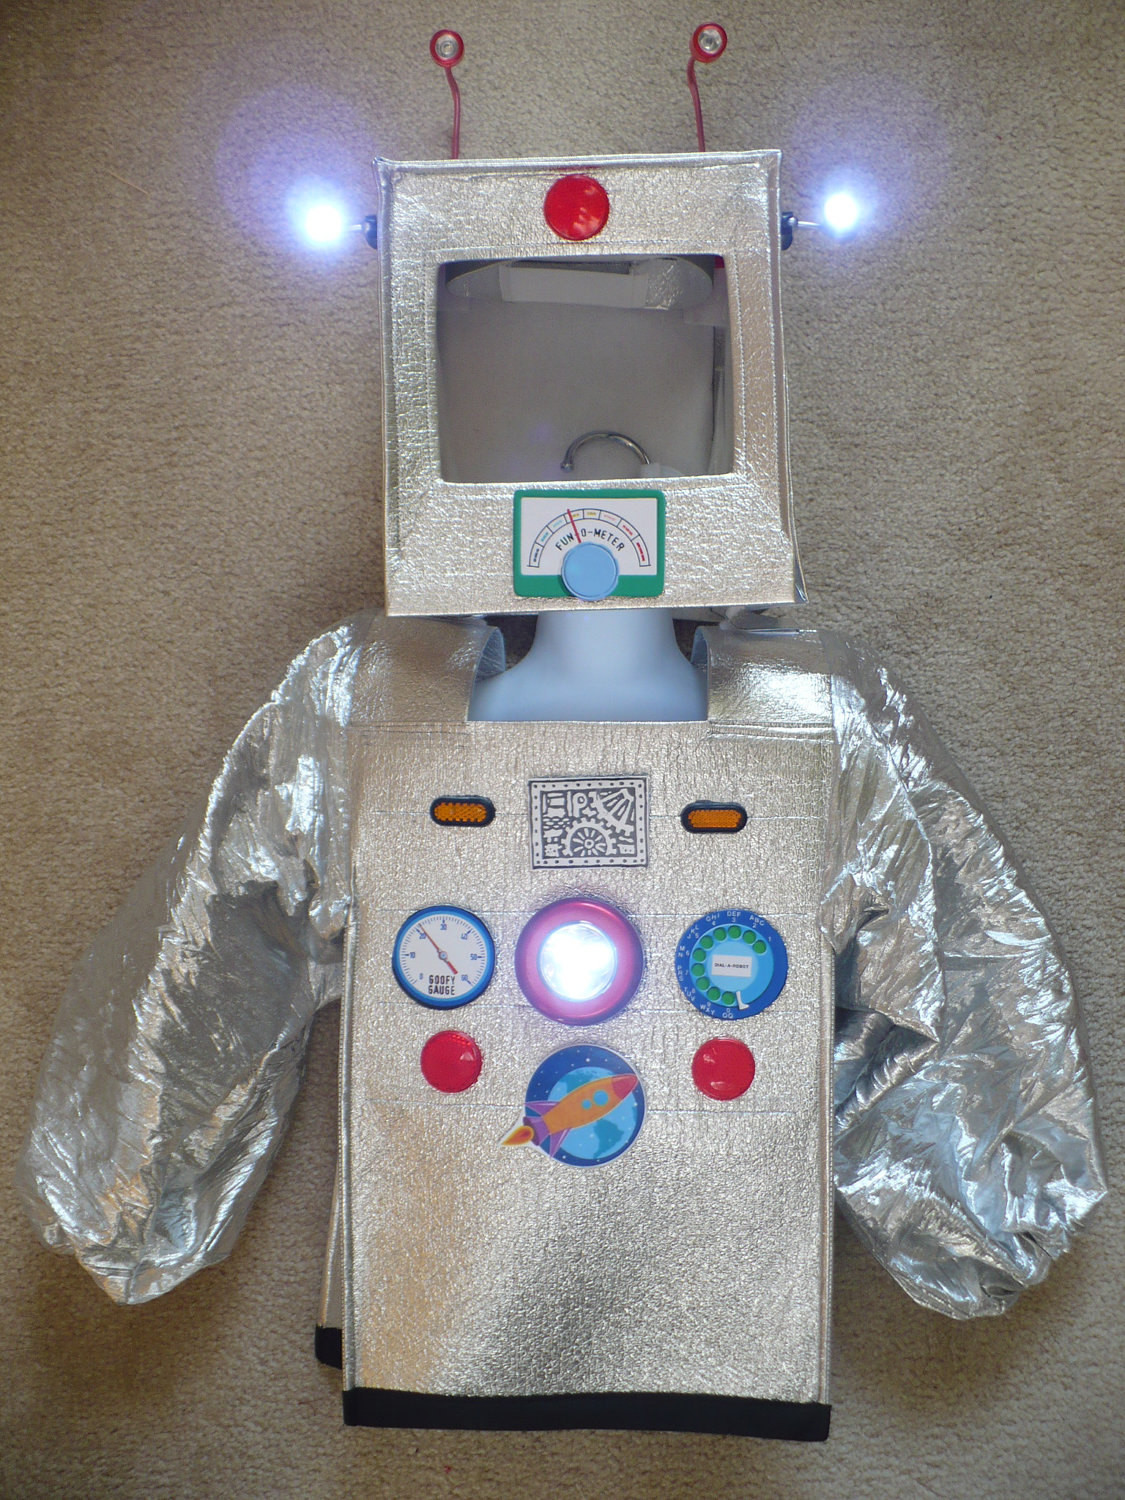 DIY Robot Costume Toddler
 Cute Robot Costume Really Lights Upsize XS 2 4 for by